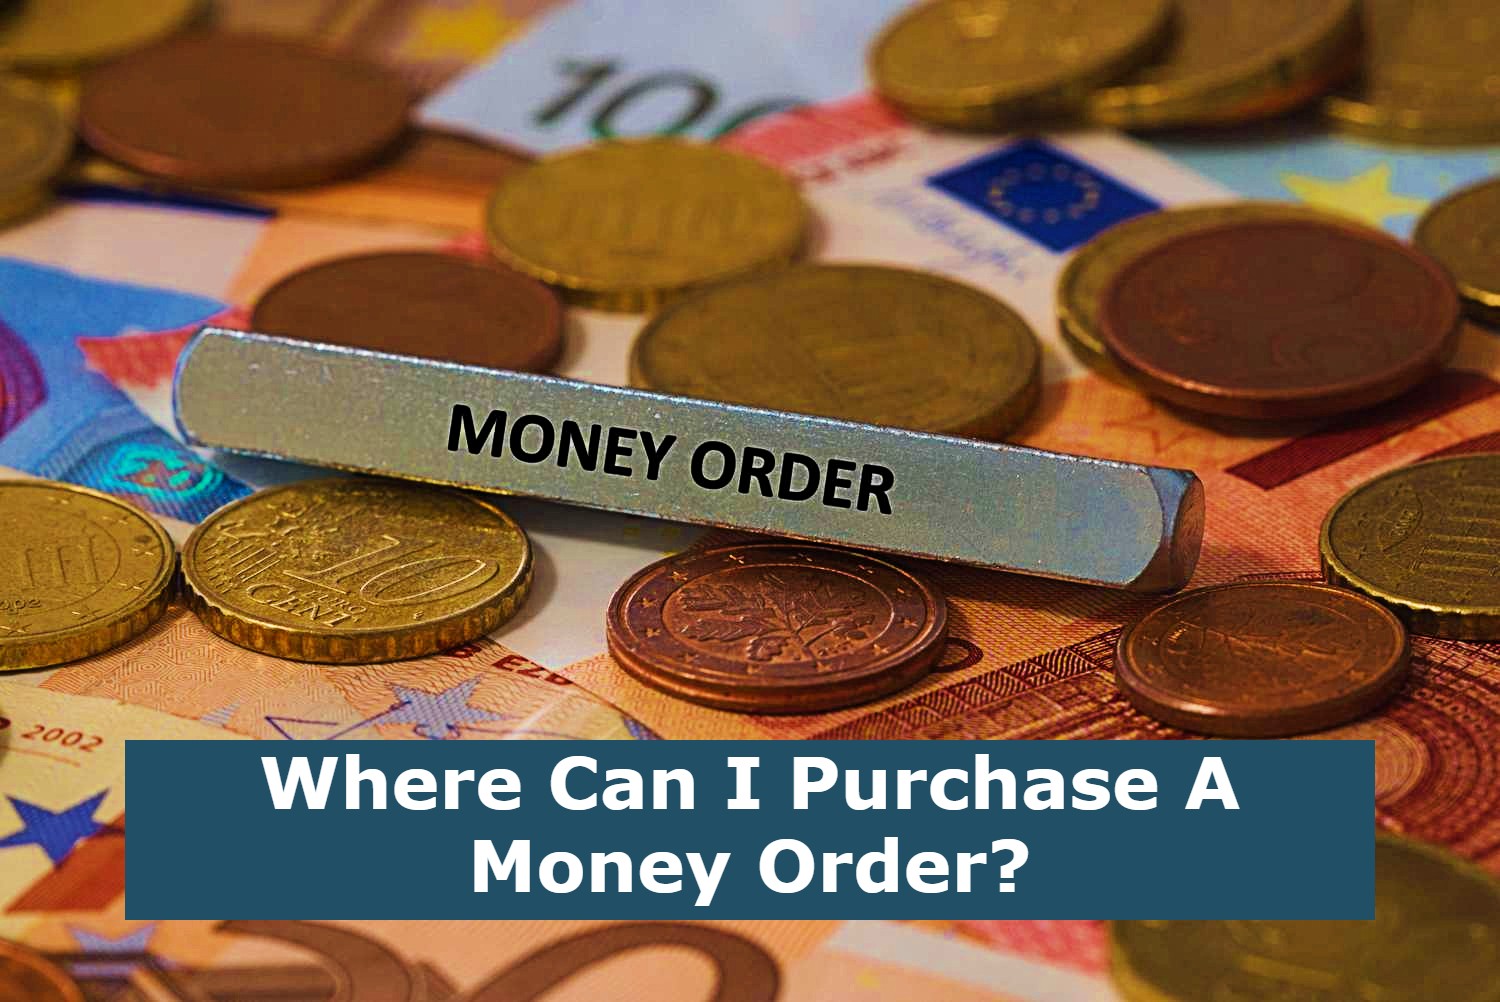 Where Can I Purchase A Money Order?